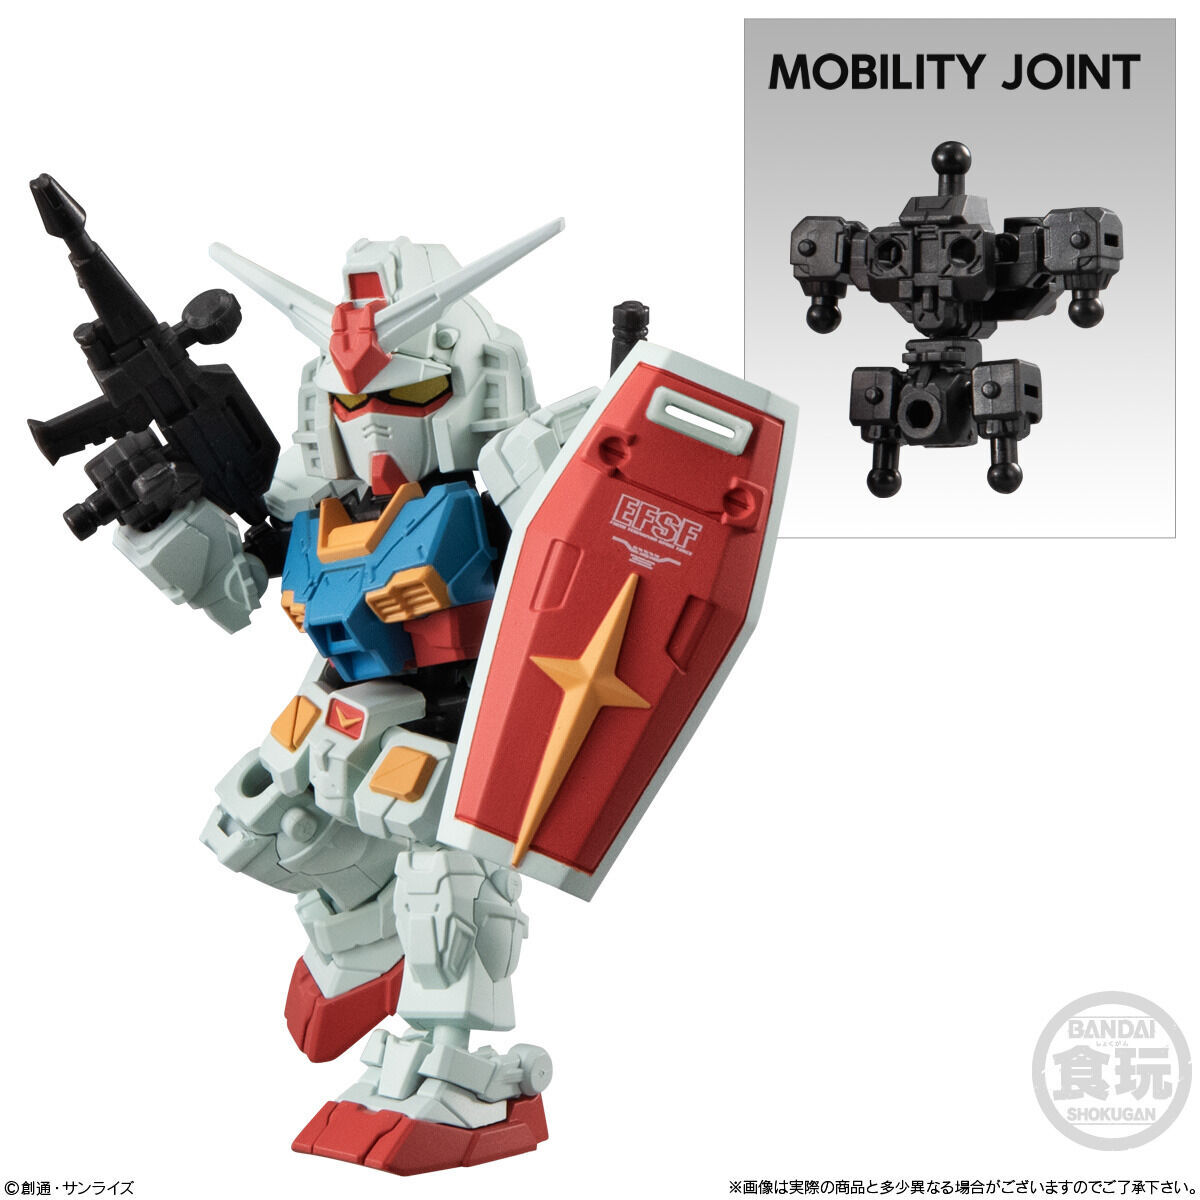 Mobility Joint Gundam SP01